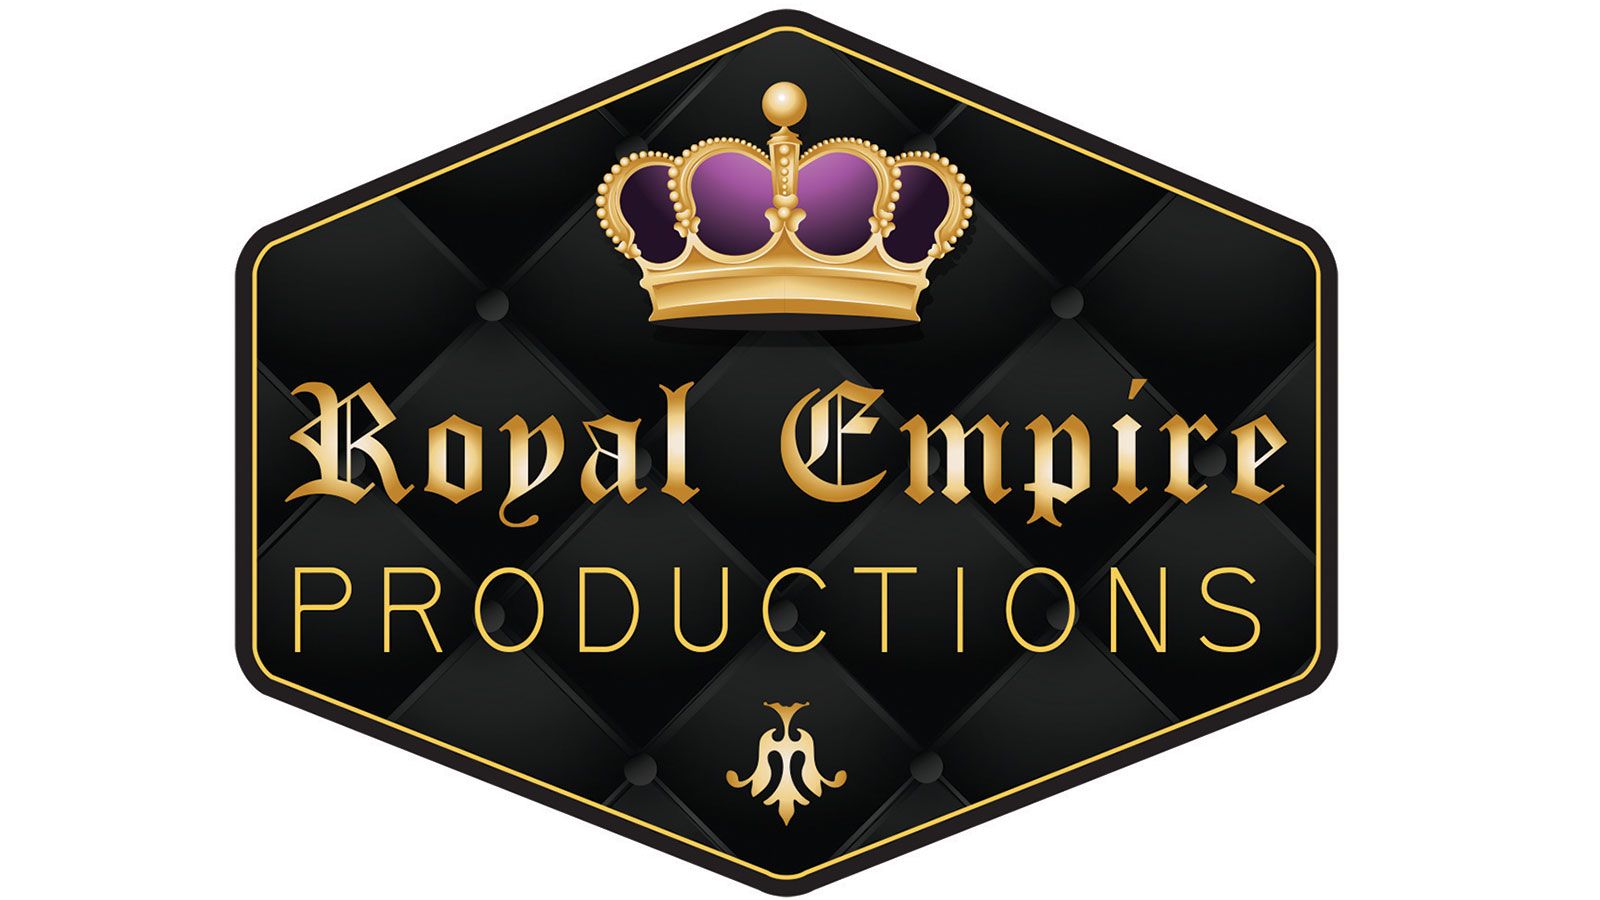 Royal Empire Productions Bringing Several XXX Beauties To AEE